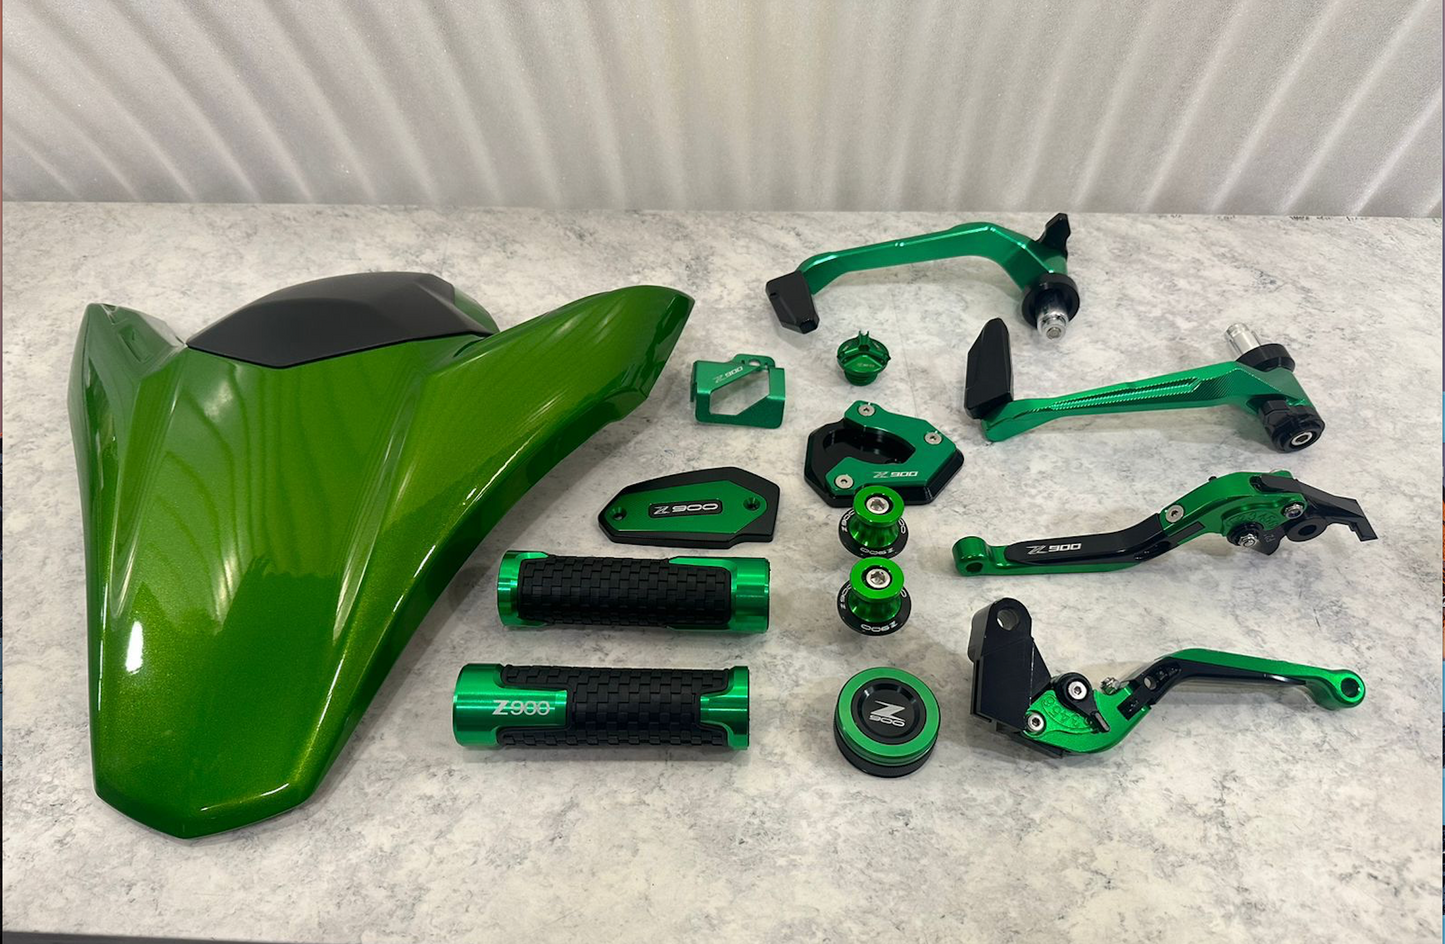 Combo of Kawasaki Z900 Accessories Rear Seat Cowl ,engine oil cap bolt , Lever Clutch, Handle Grip,hand guard / lever guard Front and Rear Brake Fluid Cover, Disc Oil Cap, Bike Side Stand Extender with Z900 Logo Complete 10 Items (Green)